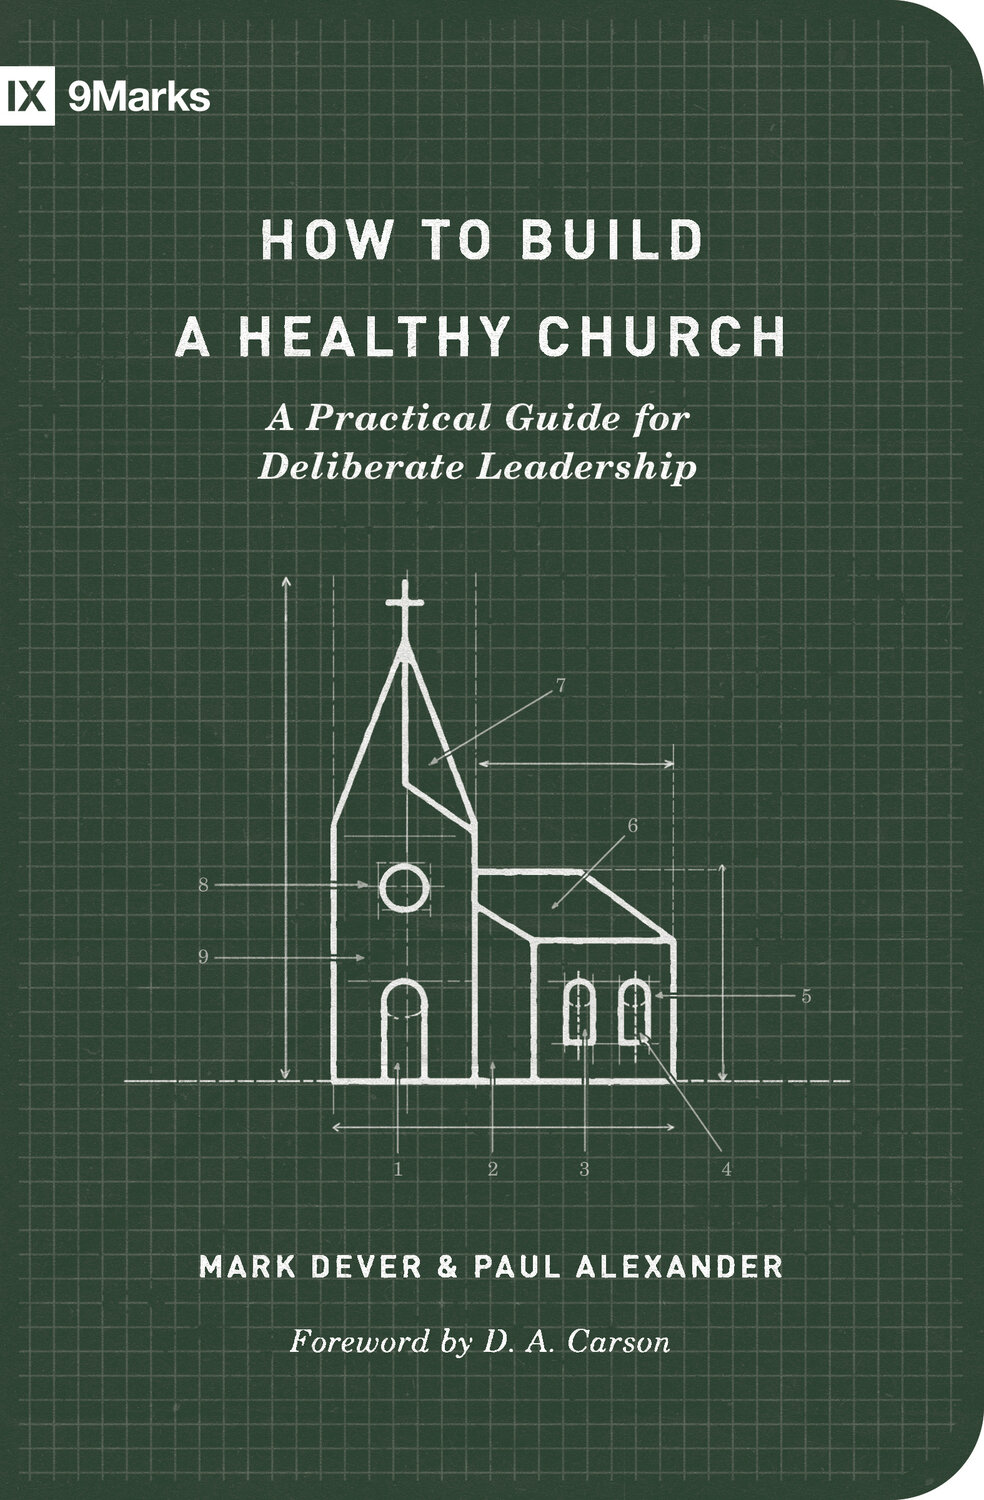 How to Build a Healthy Church: A Practical Guide for Deliberate Leadership, 2nd ed.